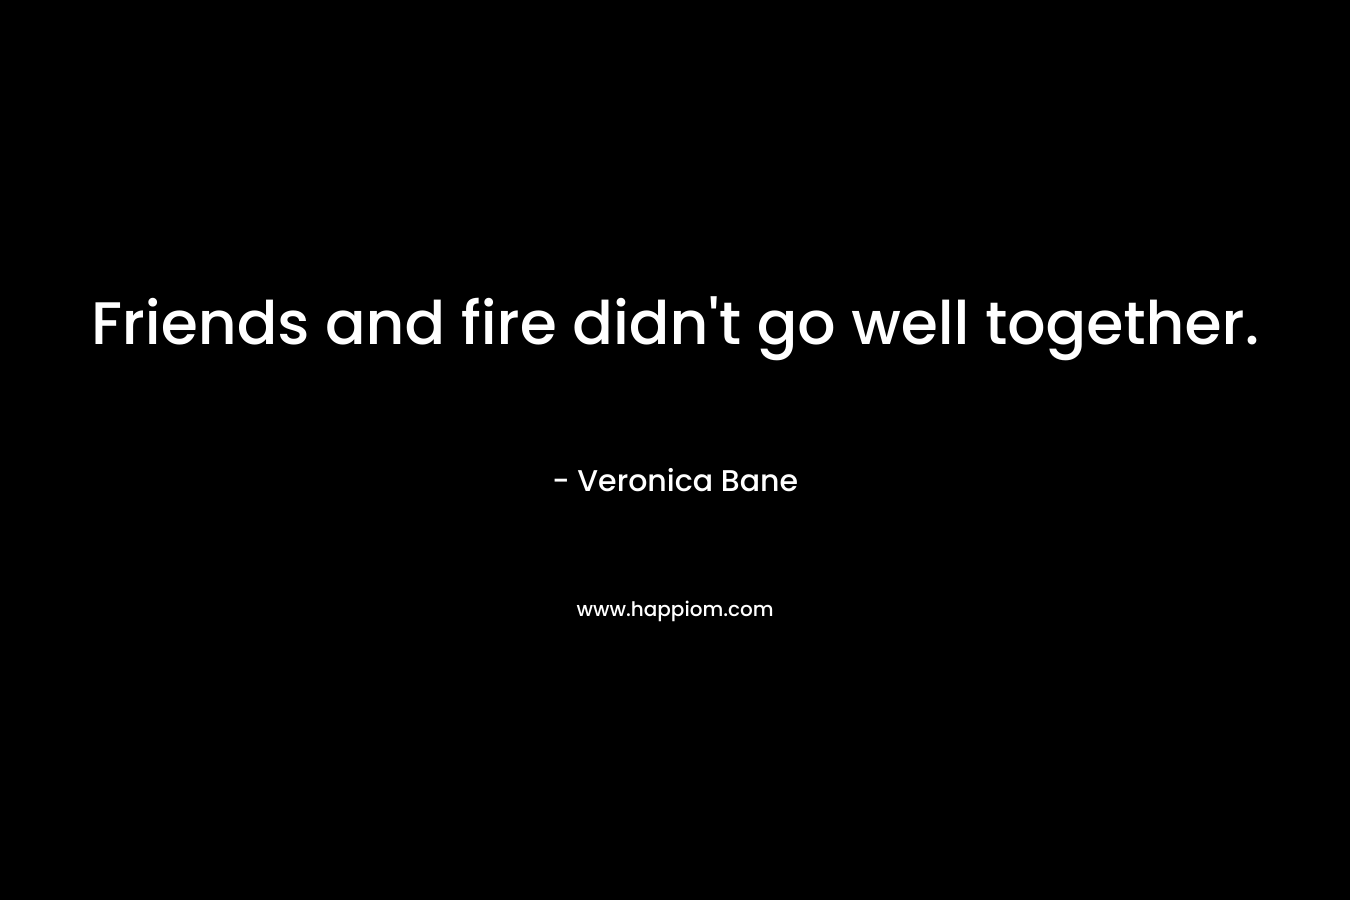 Friends and fire didn’t go well together. – Veronica Bane